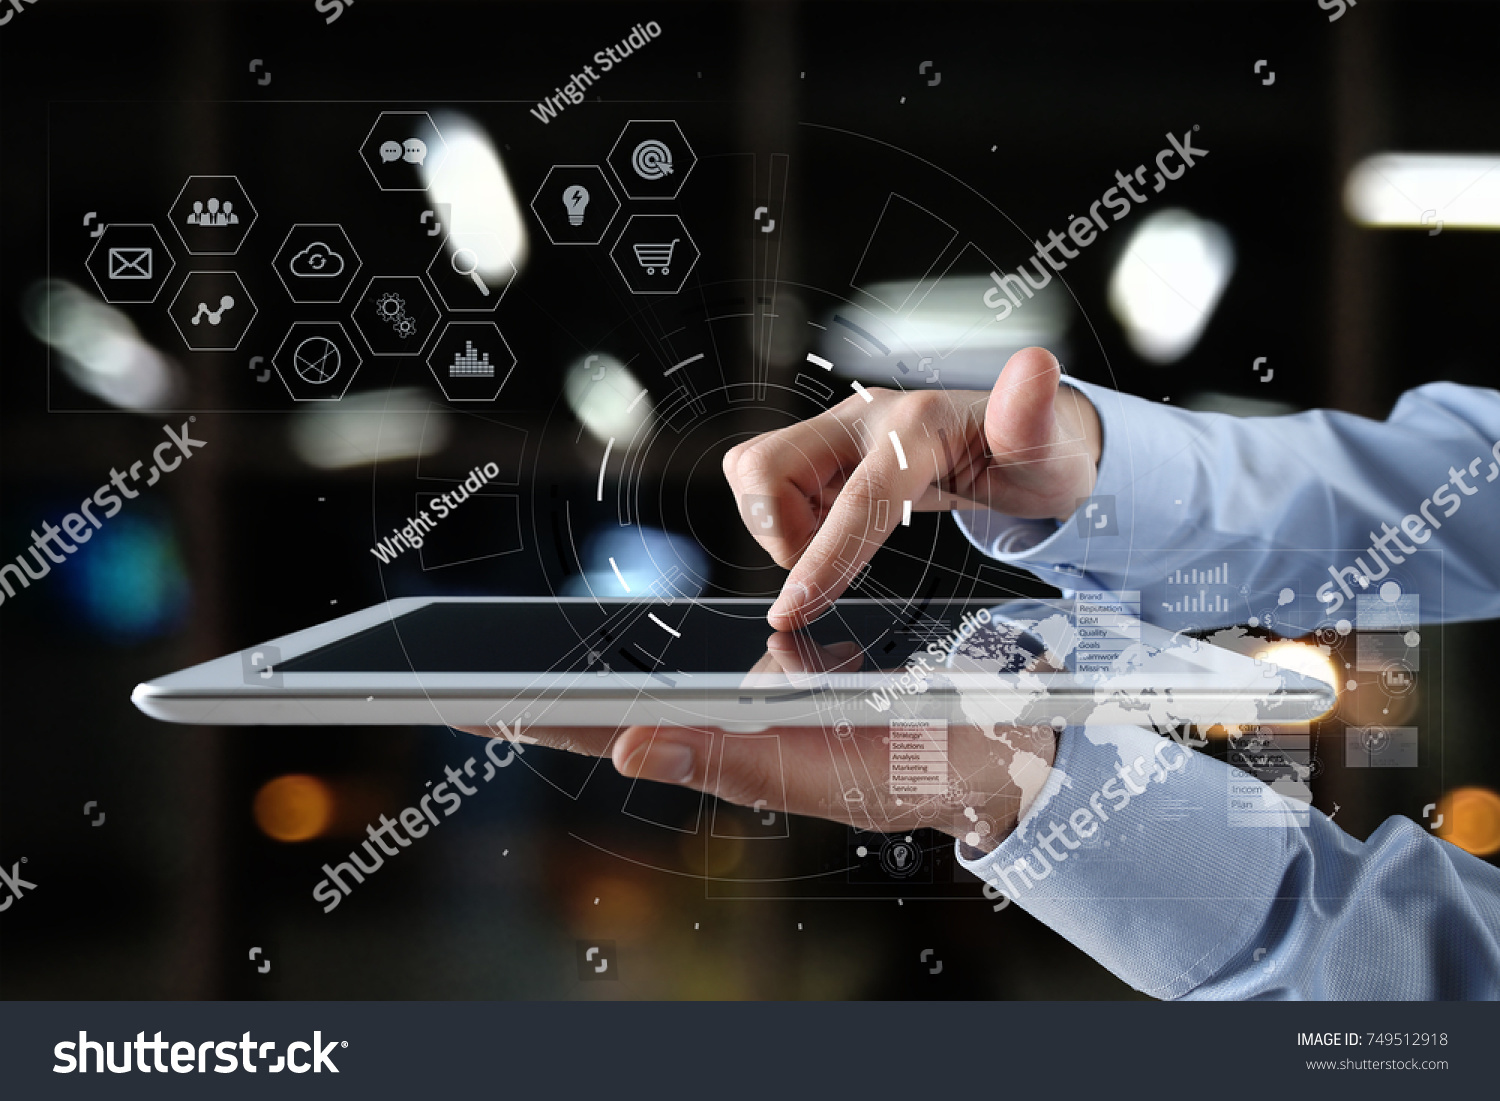 Futuristic virtual screen hologram. Business internet and technology concept. Modern computer. VR. Virtual reality. #749512918